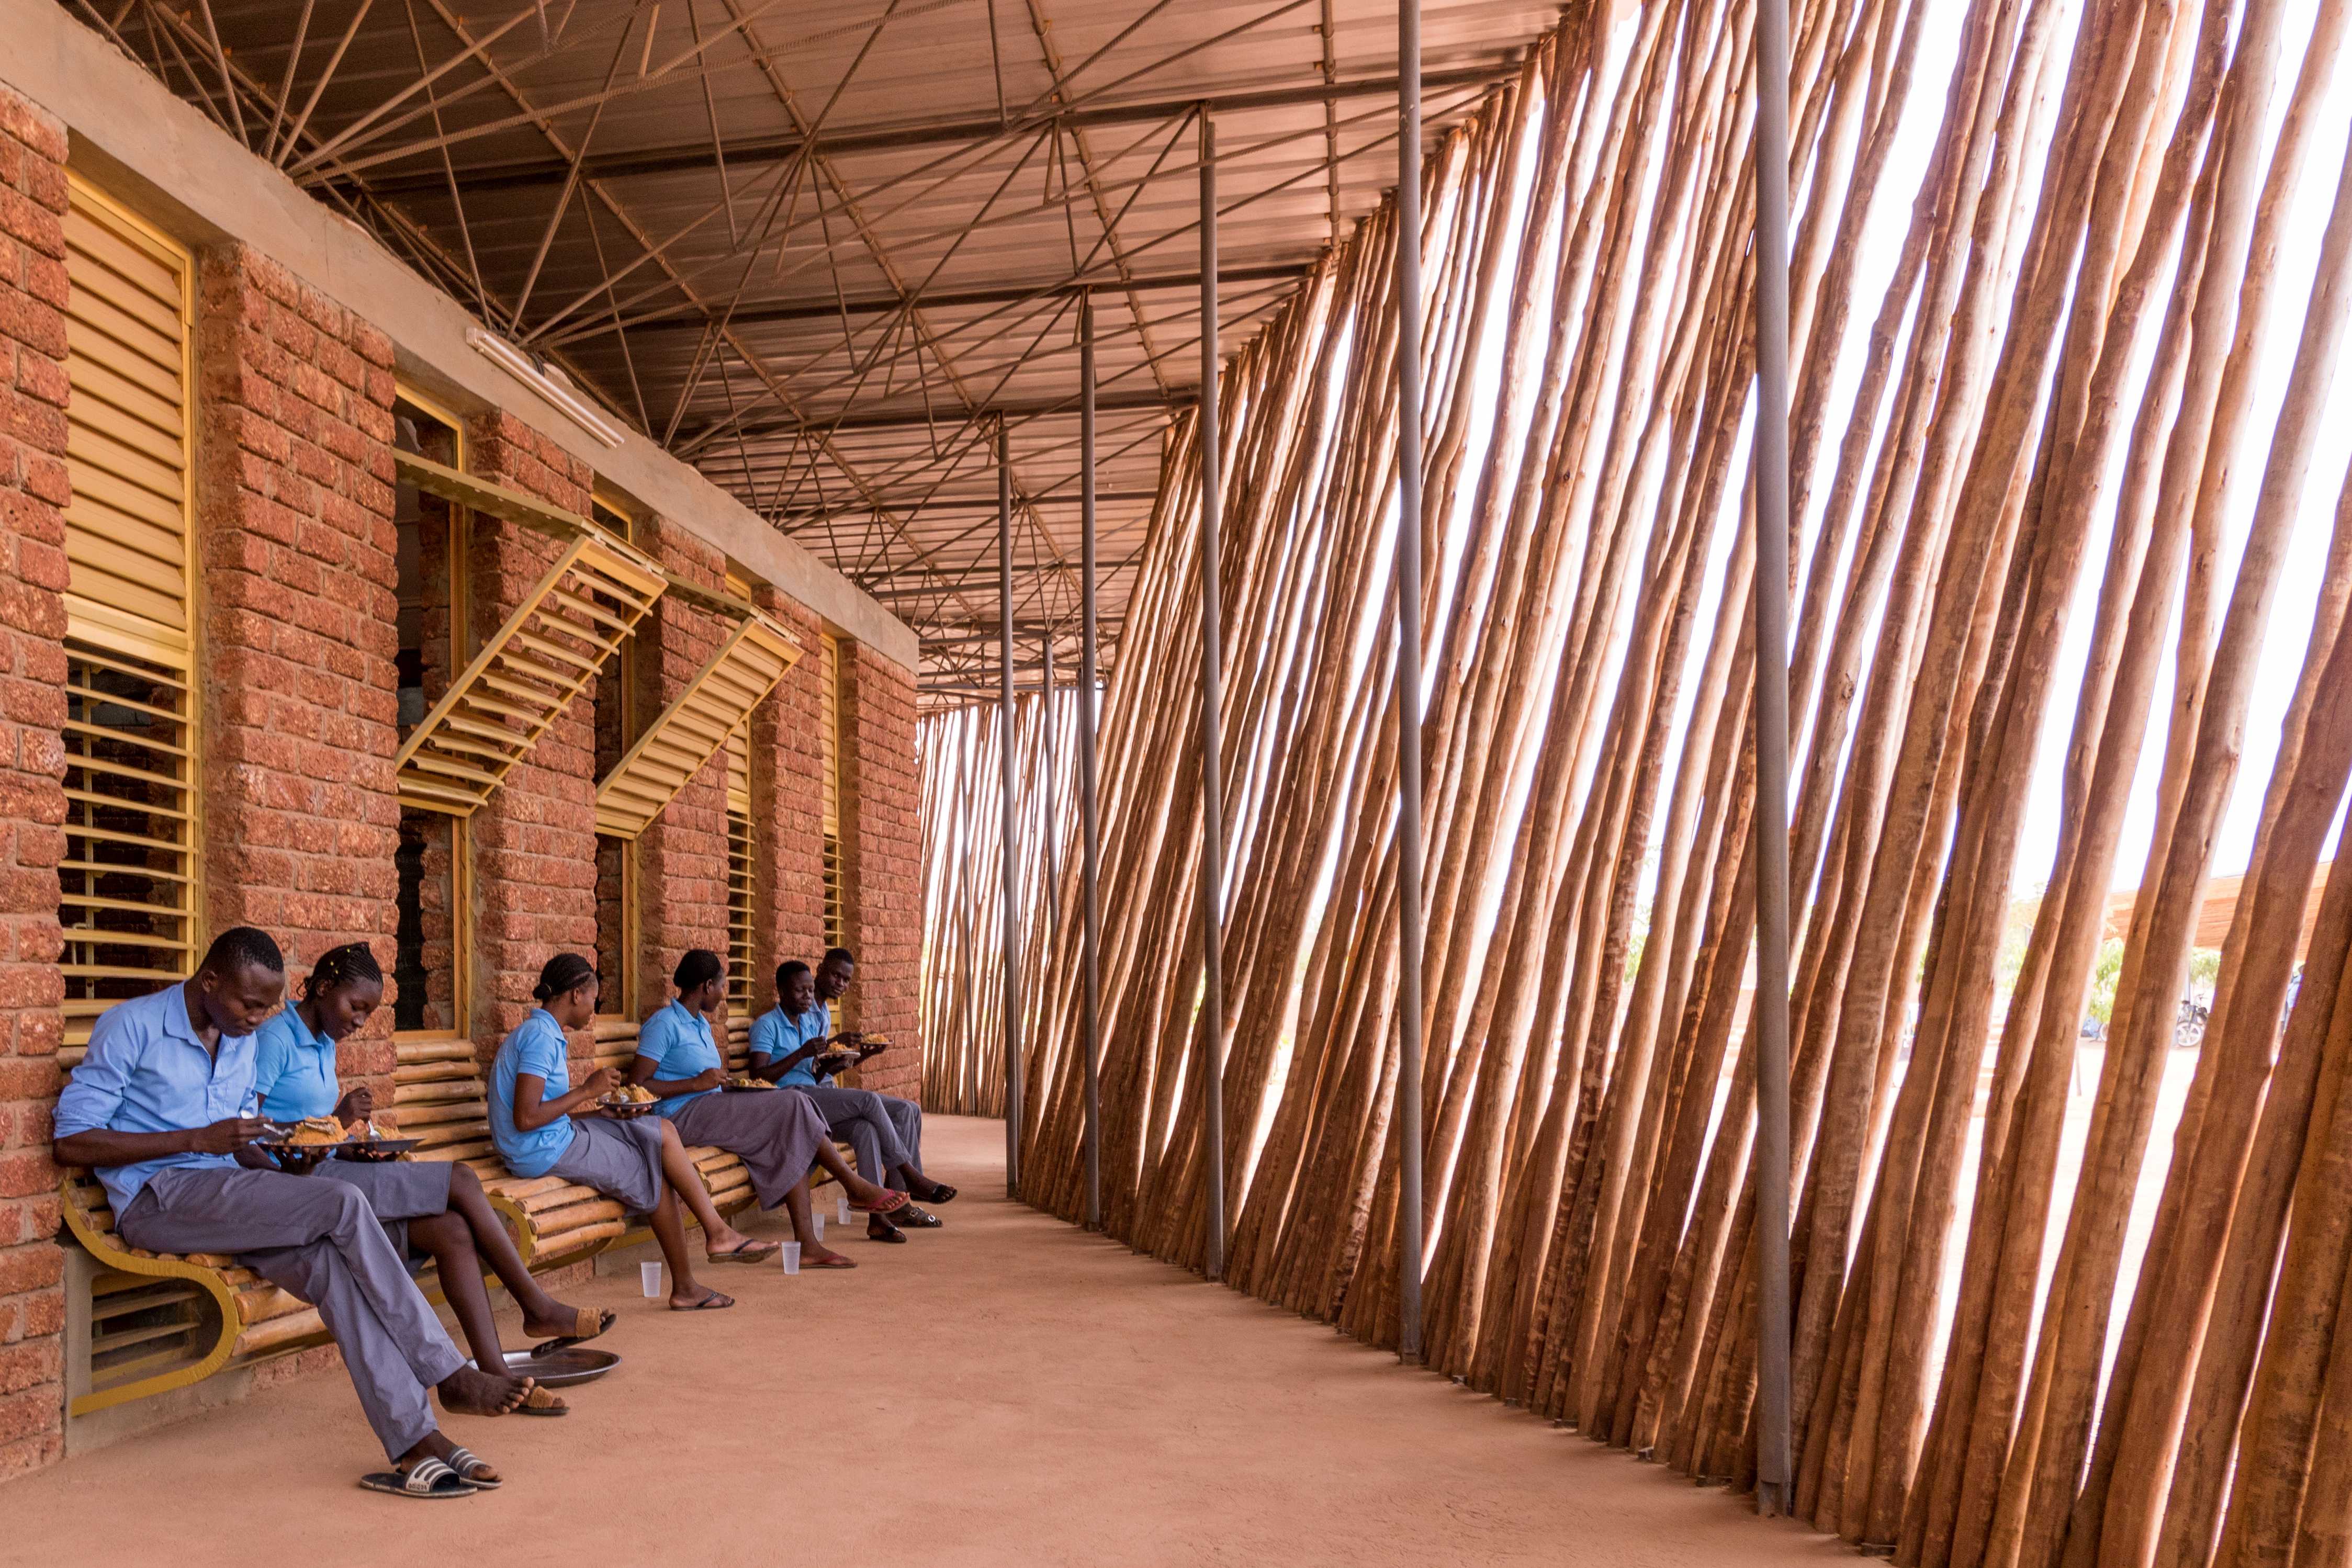 An inside view of the Lycée Schorge Secondary School with students sitting on wood benches and wooden divider.